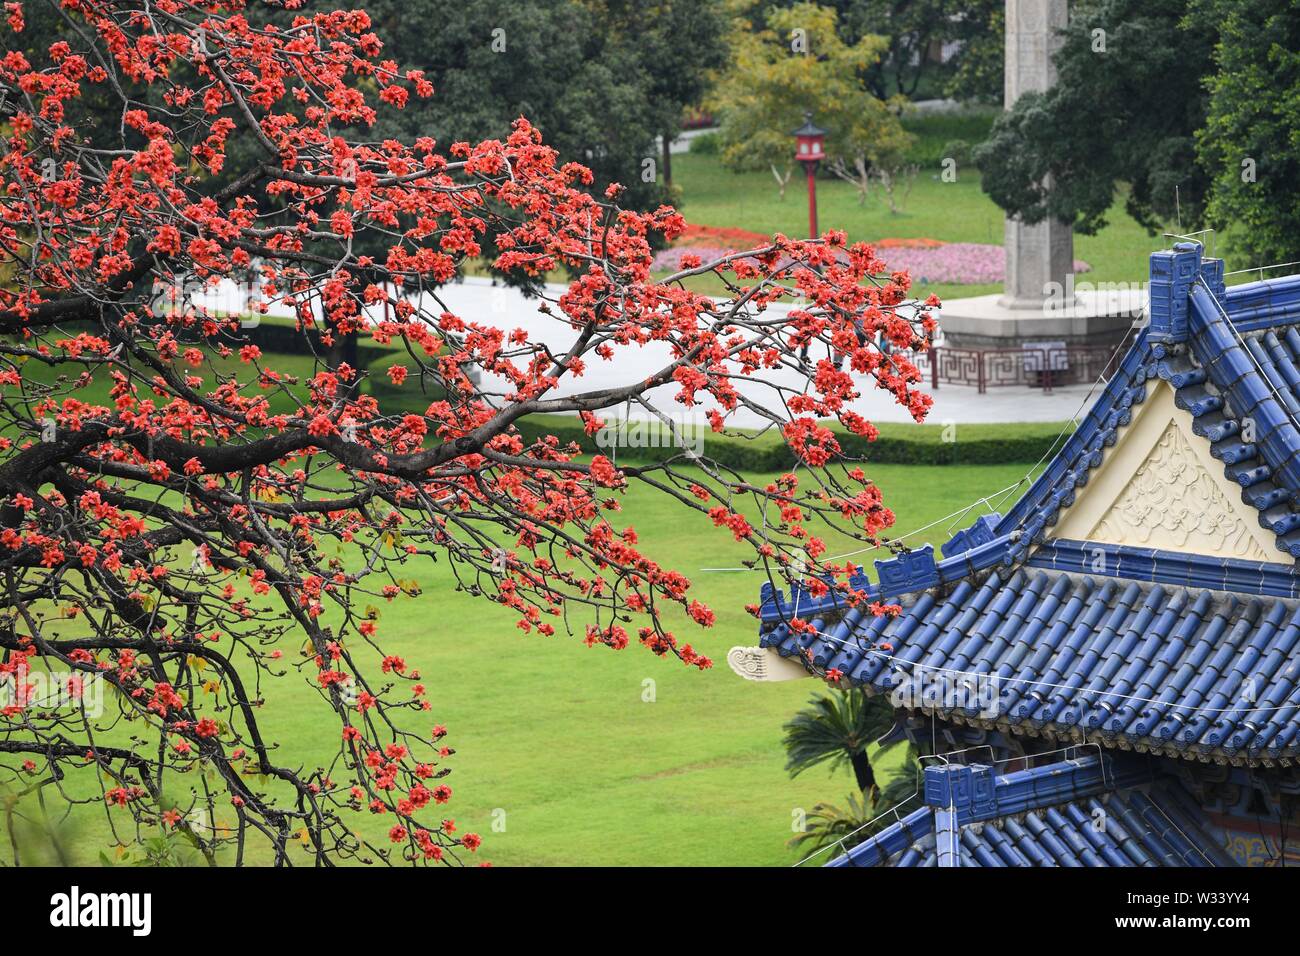 (190712) -- BEIJING, July 12, 2019 (Xinhua) -- Photo taken on Feb. 24, 2019 shows kapok flowers at Sun Yat-sen Memorial Hall in Guangzhou, capital of south China's Guangdong Province. Located in south China, Guangdong Province faces the South China Sea and borders Hunan and Jiangxi provinces to the north. It boasts the well-known Pearl River Delta, which is composed of three upstream rivers and a large number of islands. Due to the climate, Guangdong is famous for a diversified ecological system and environment. In recent years, by upholding the principle of green development, Guangdong has Stock Photo